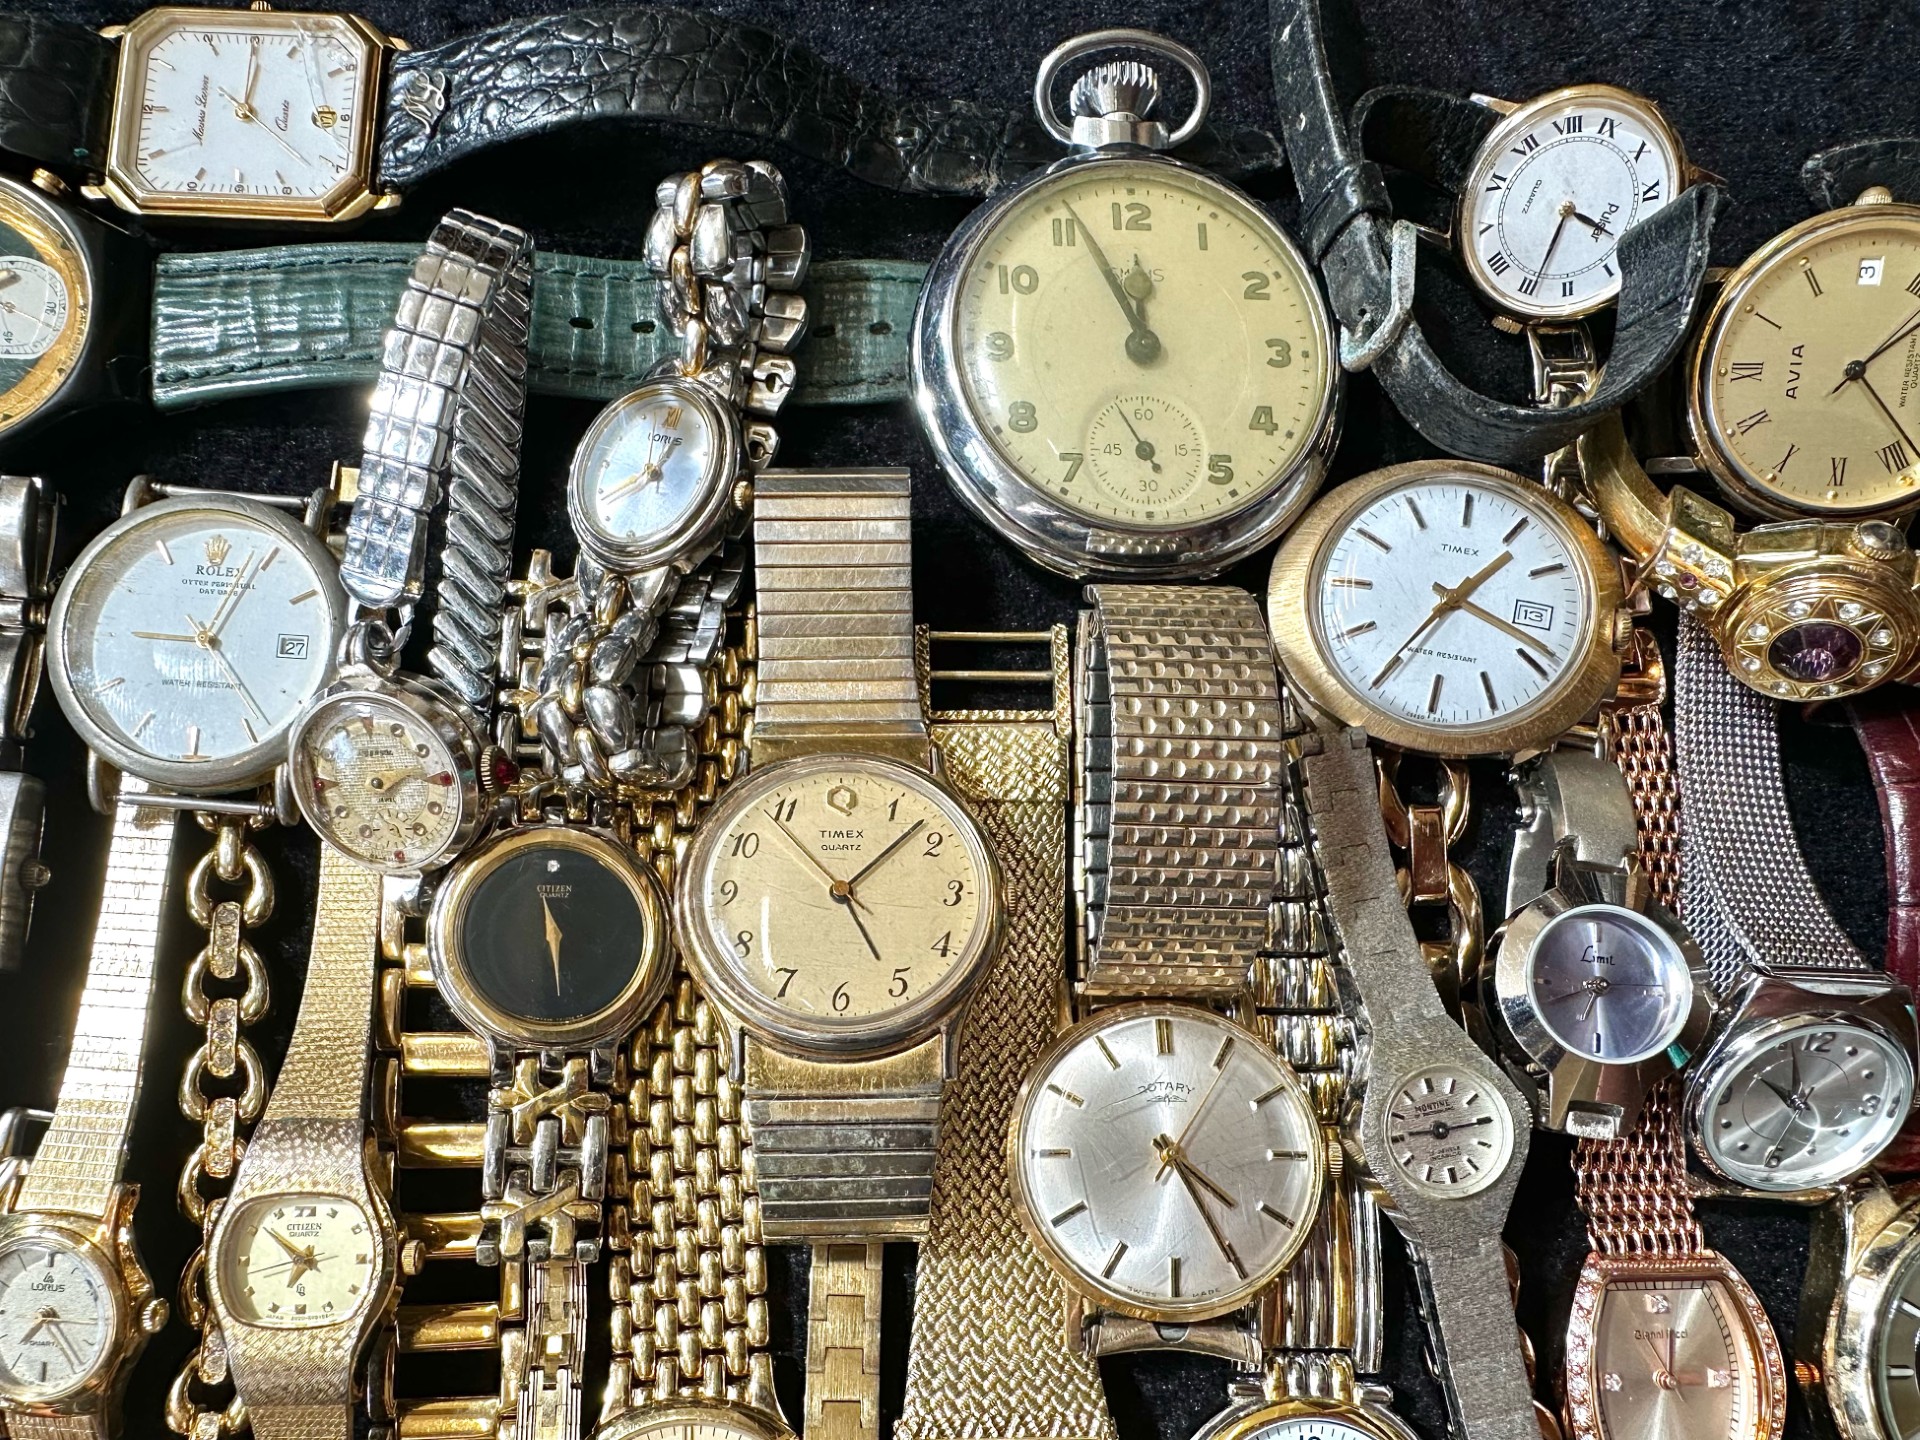 Collection of Ladies & Gentlemen's Wristwatches, leather and bracelet straps, various makes - Image 4 of 4